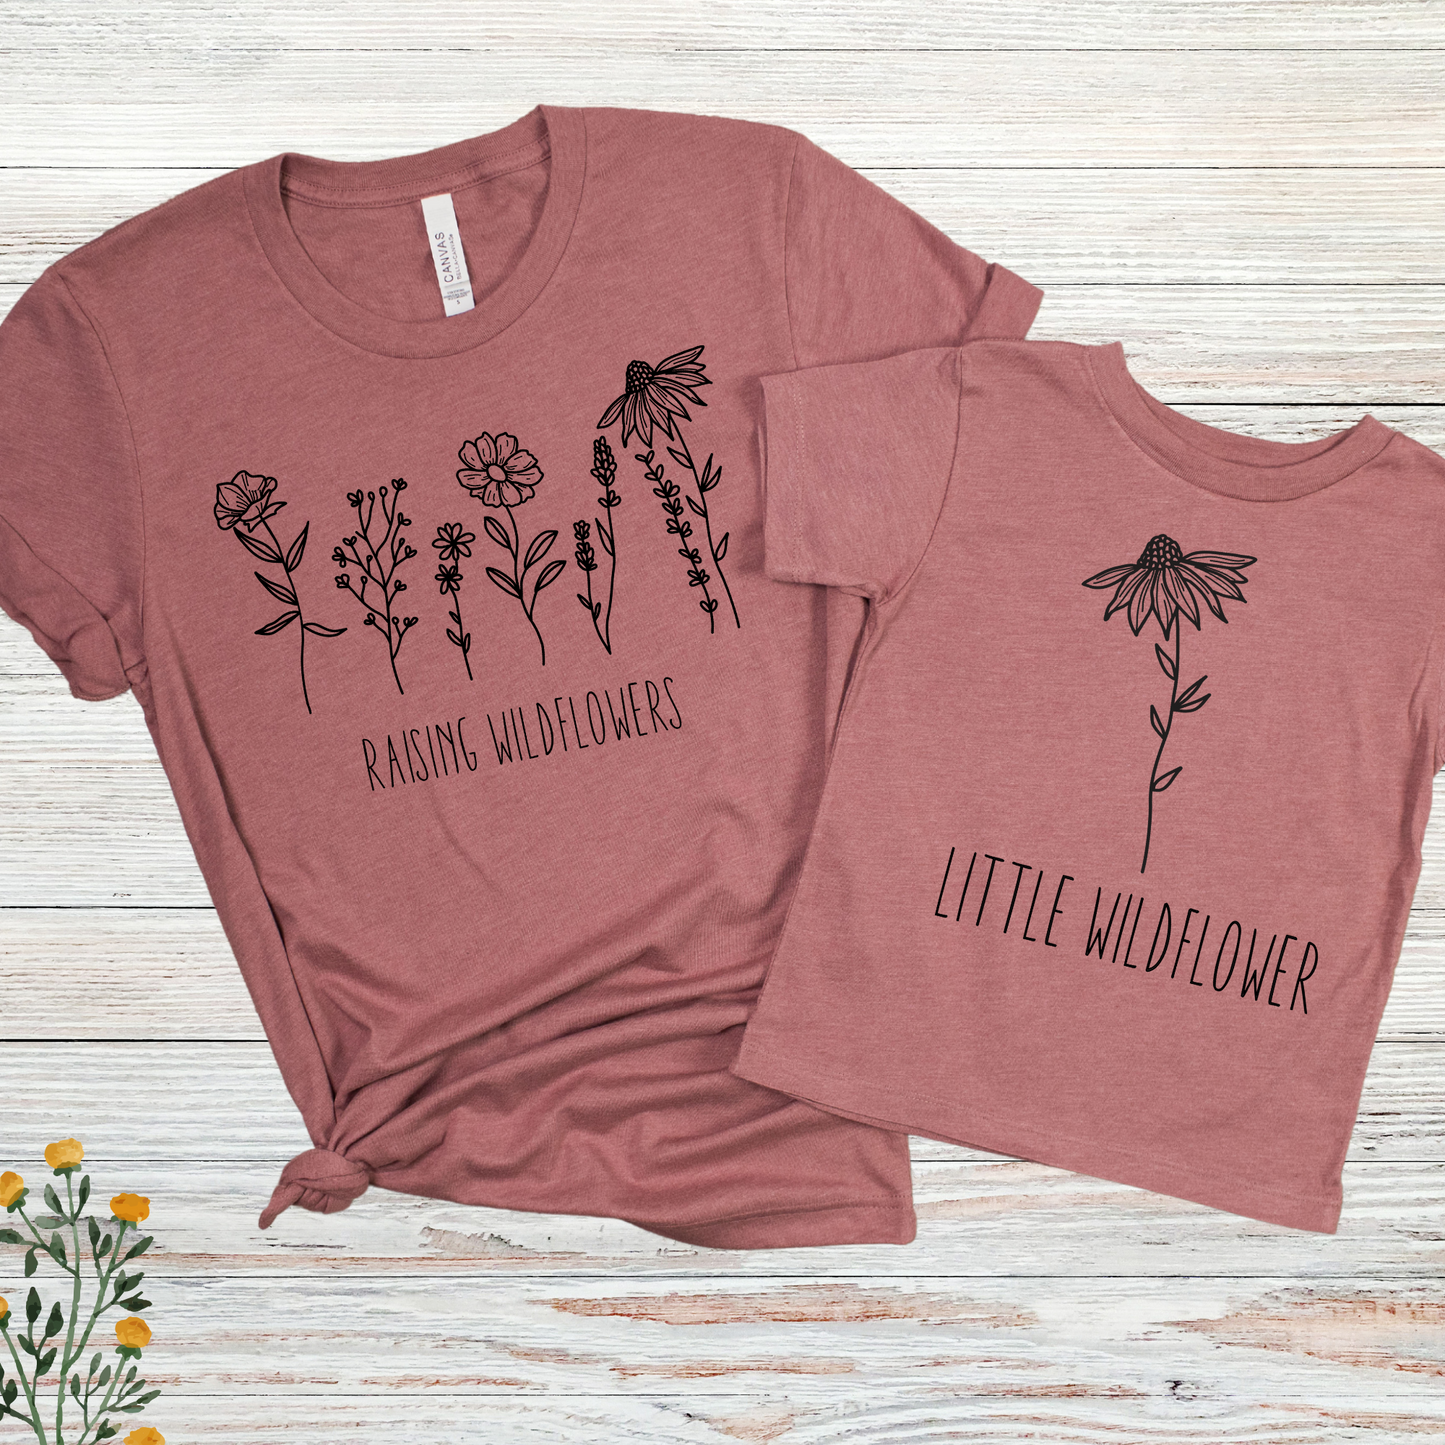 Rasing Wildflowers Shirt, Little Wildflower, Mommy and me shirts